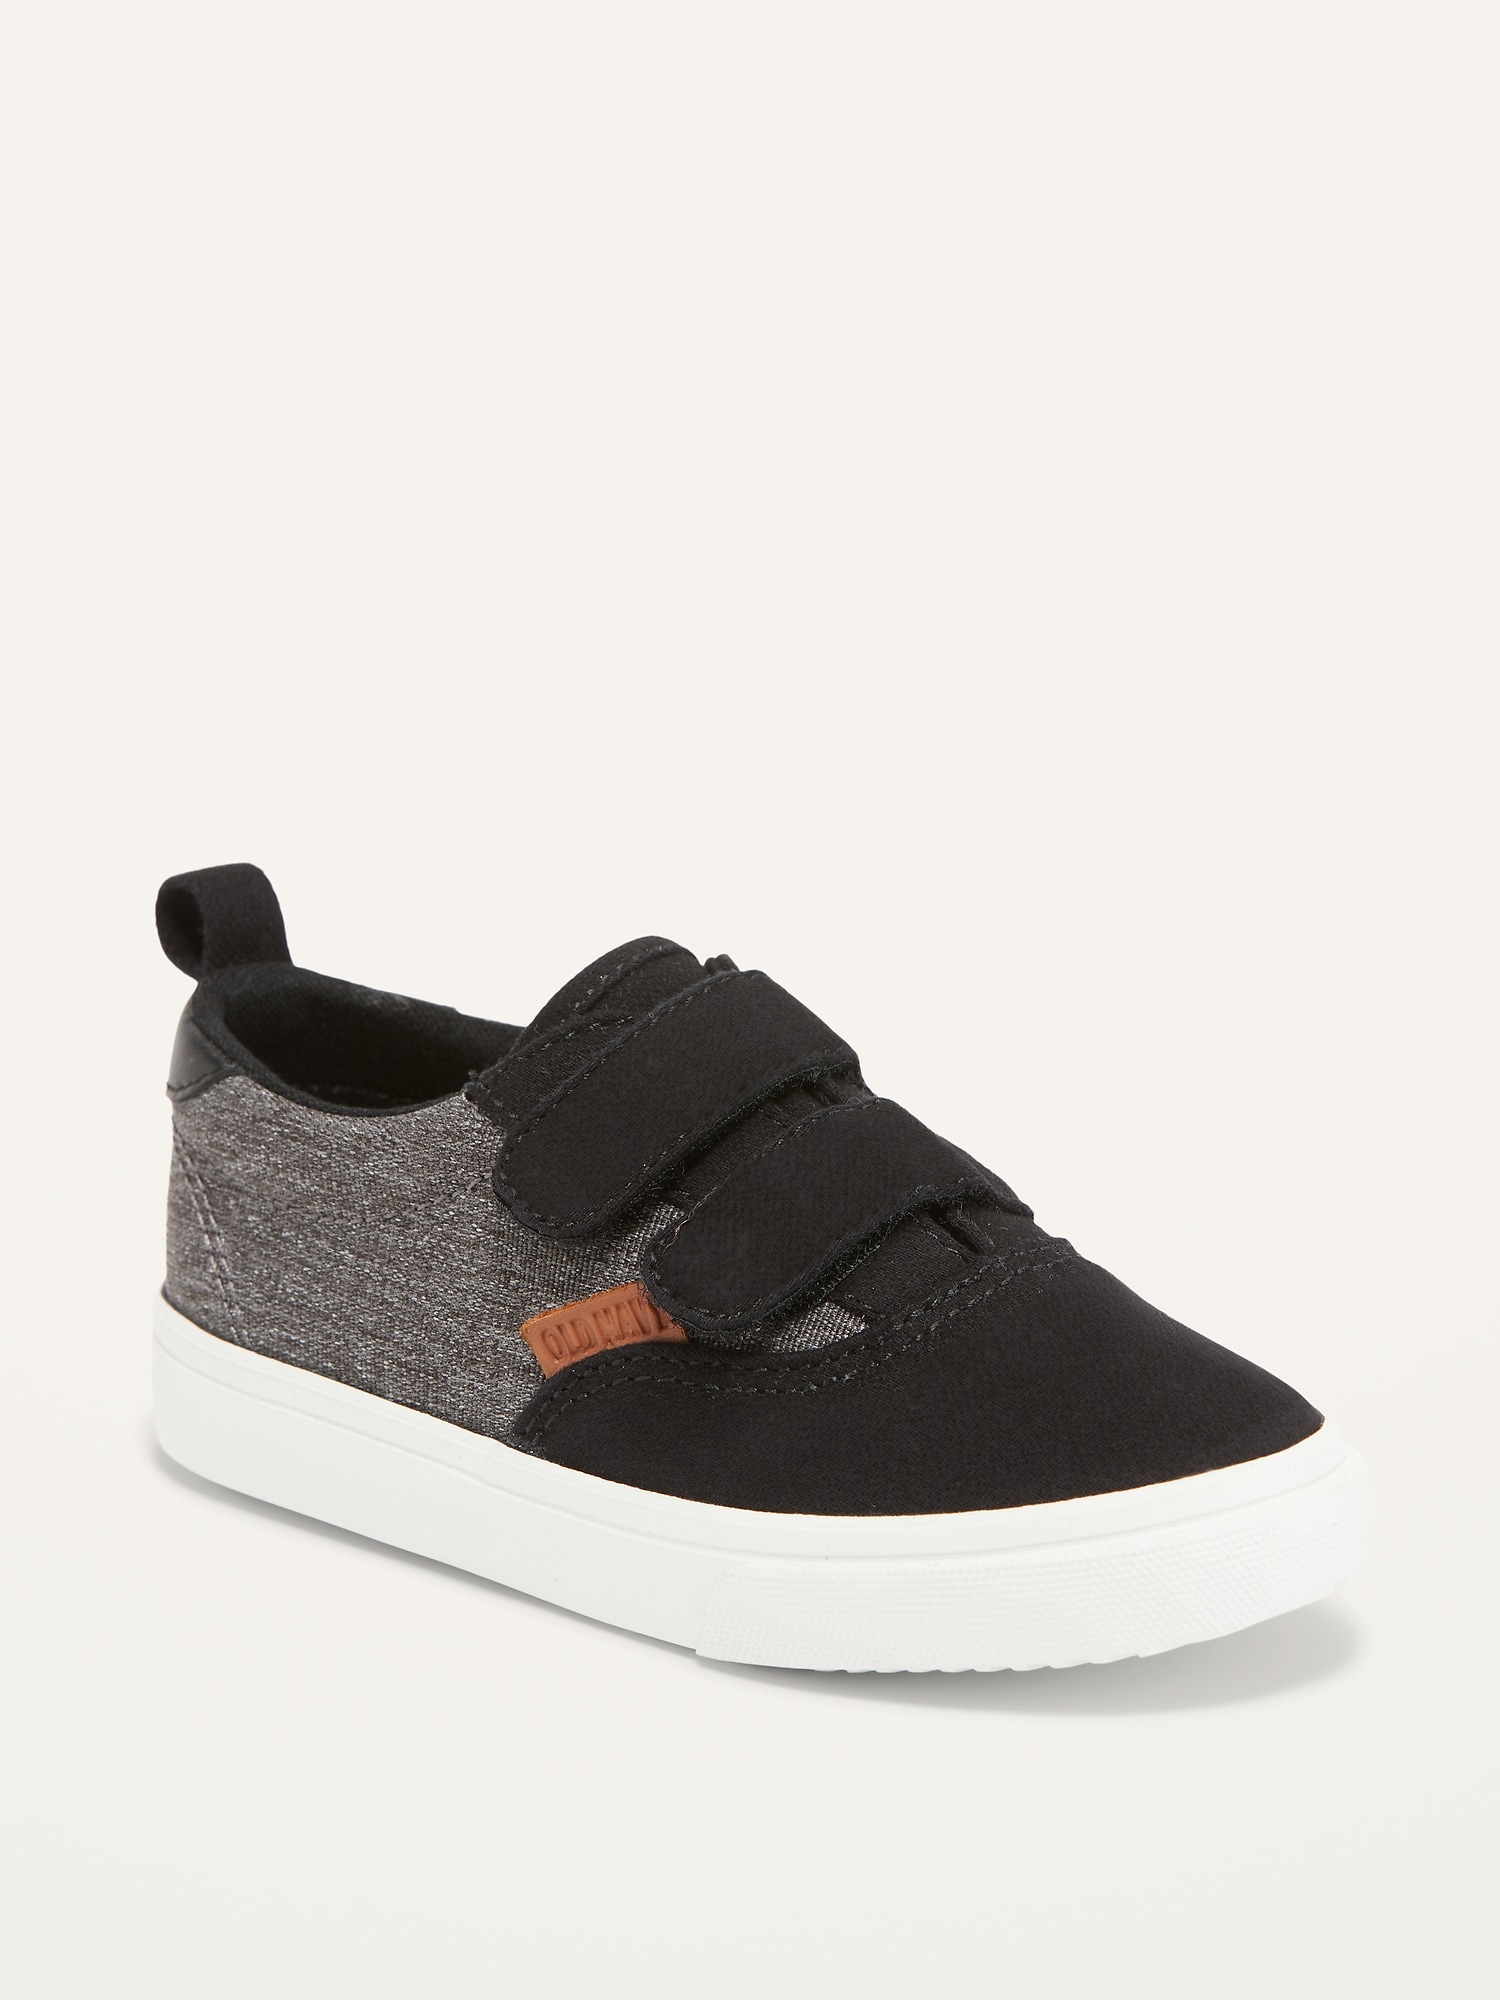 Unisex Textured Double-Strap Sneakers for Toddler